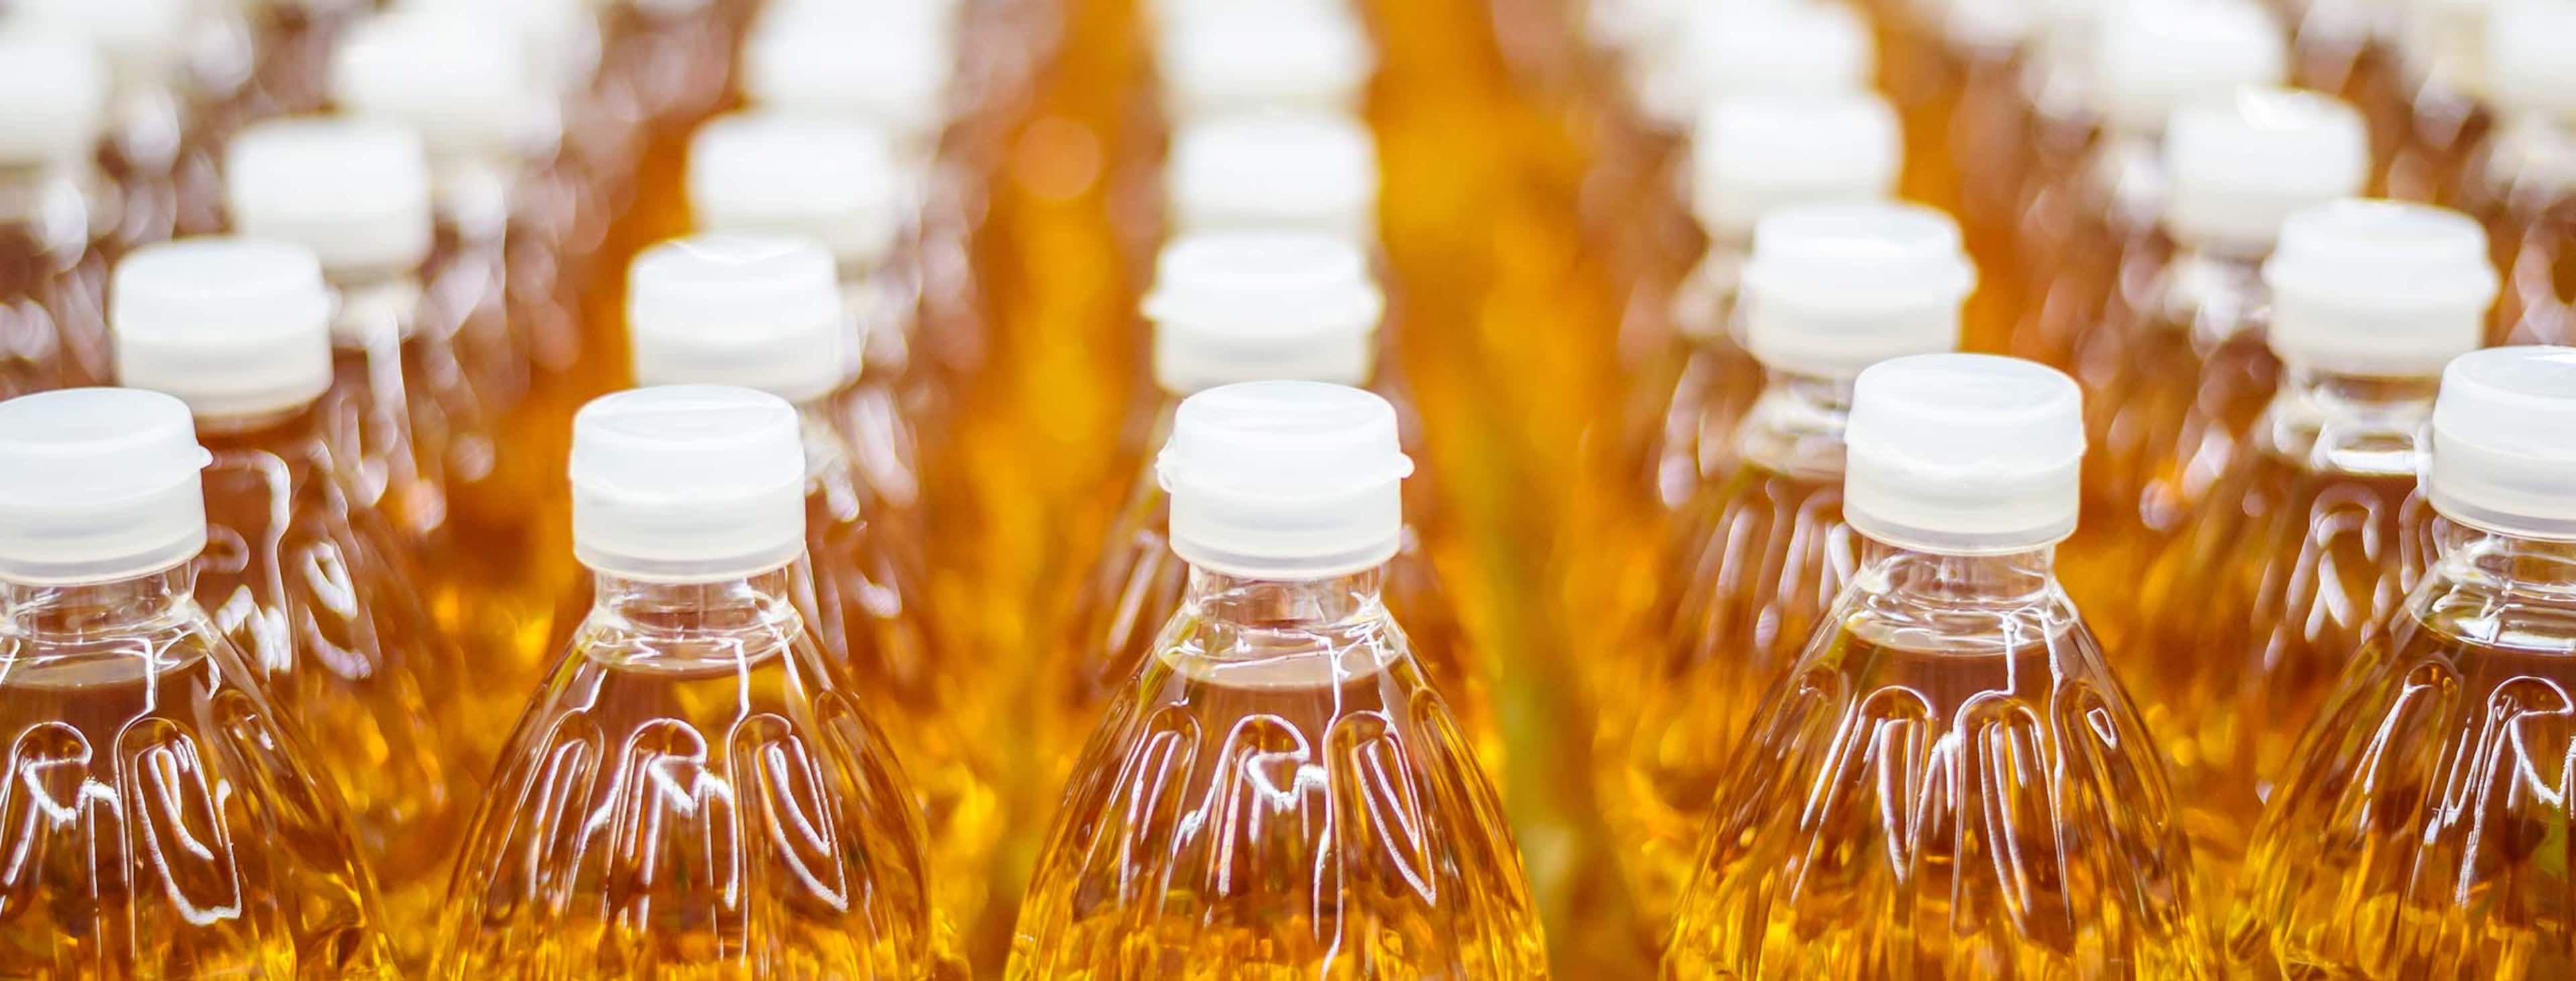 close-up image of clear soda bottles in a factory line